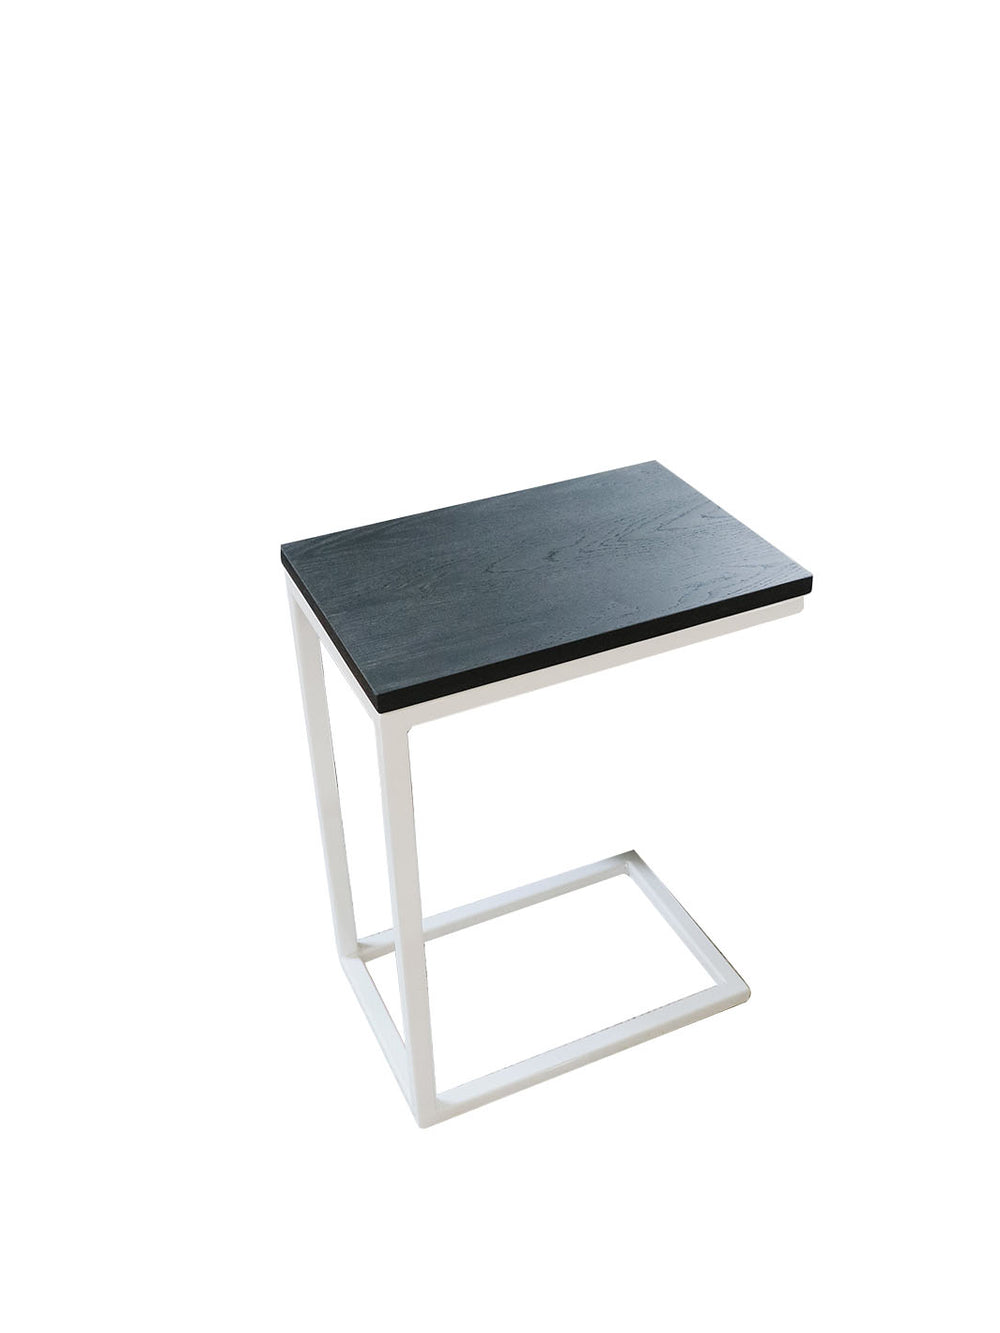 Charcoal Black Ash Industrial Side C Table with White Base Earthly Comfort Side Tables 1108-2